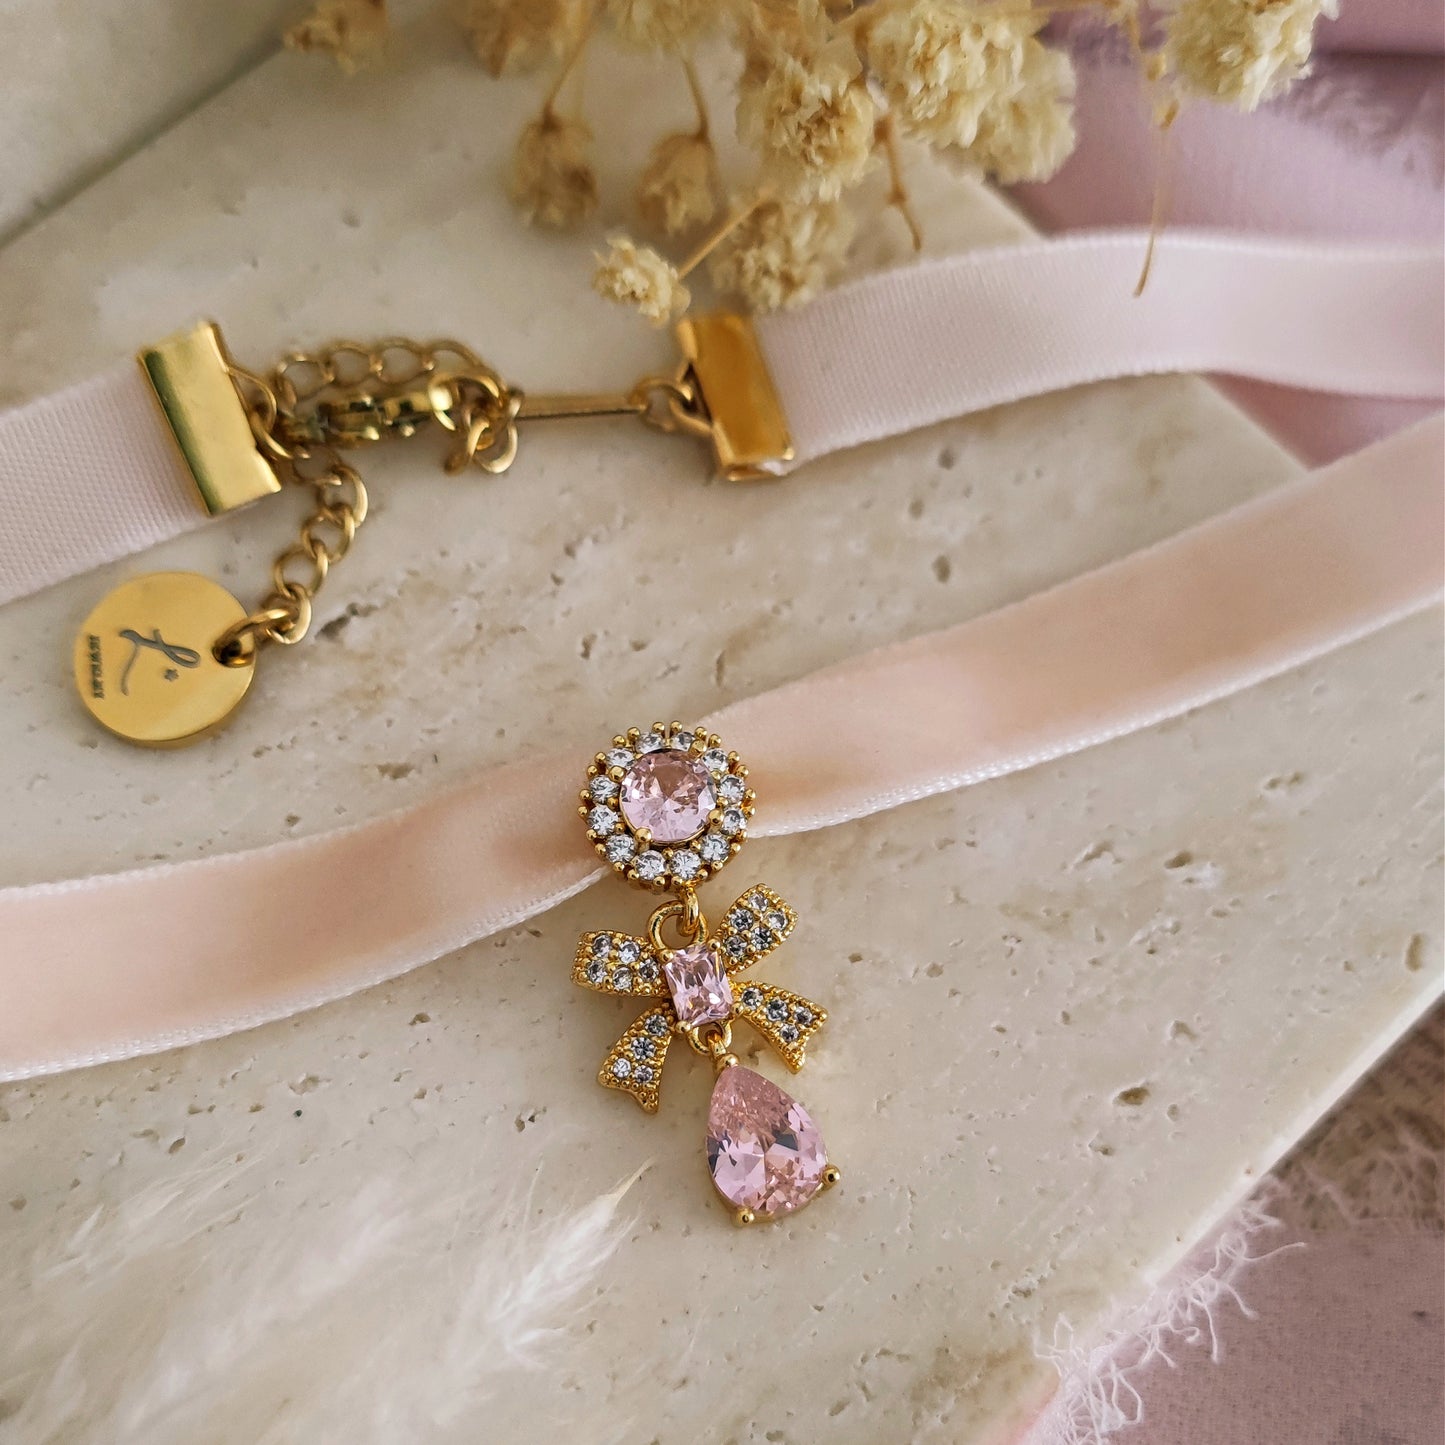 Coquette Princess Bow and Drop Choker, Princess Velvet Pink Choker, Shiny Pink Bow and Teardrop Choker, PrincessCore and RoyalCore Choker